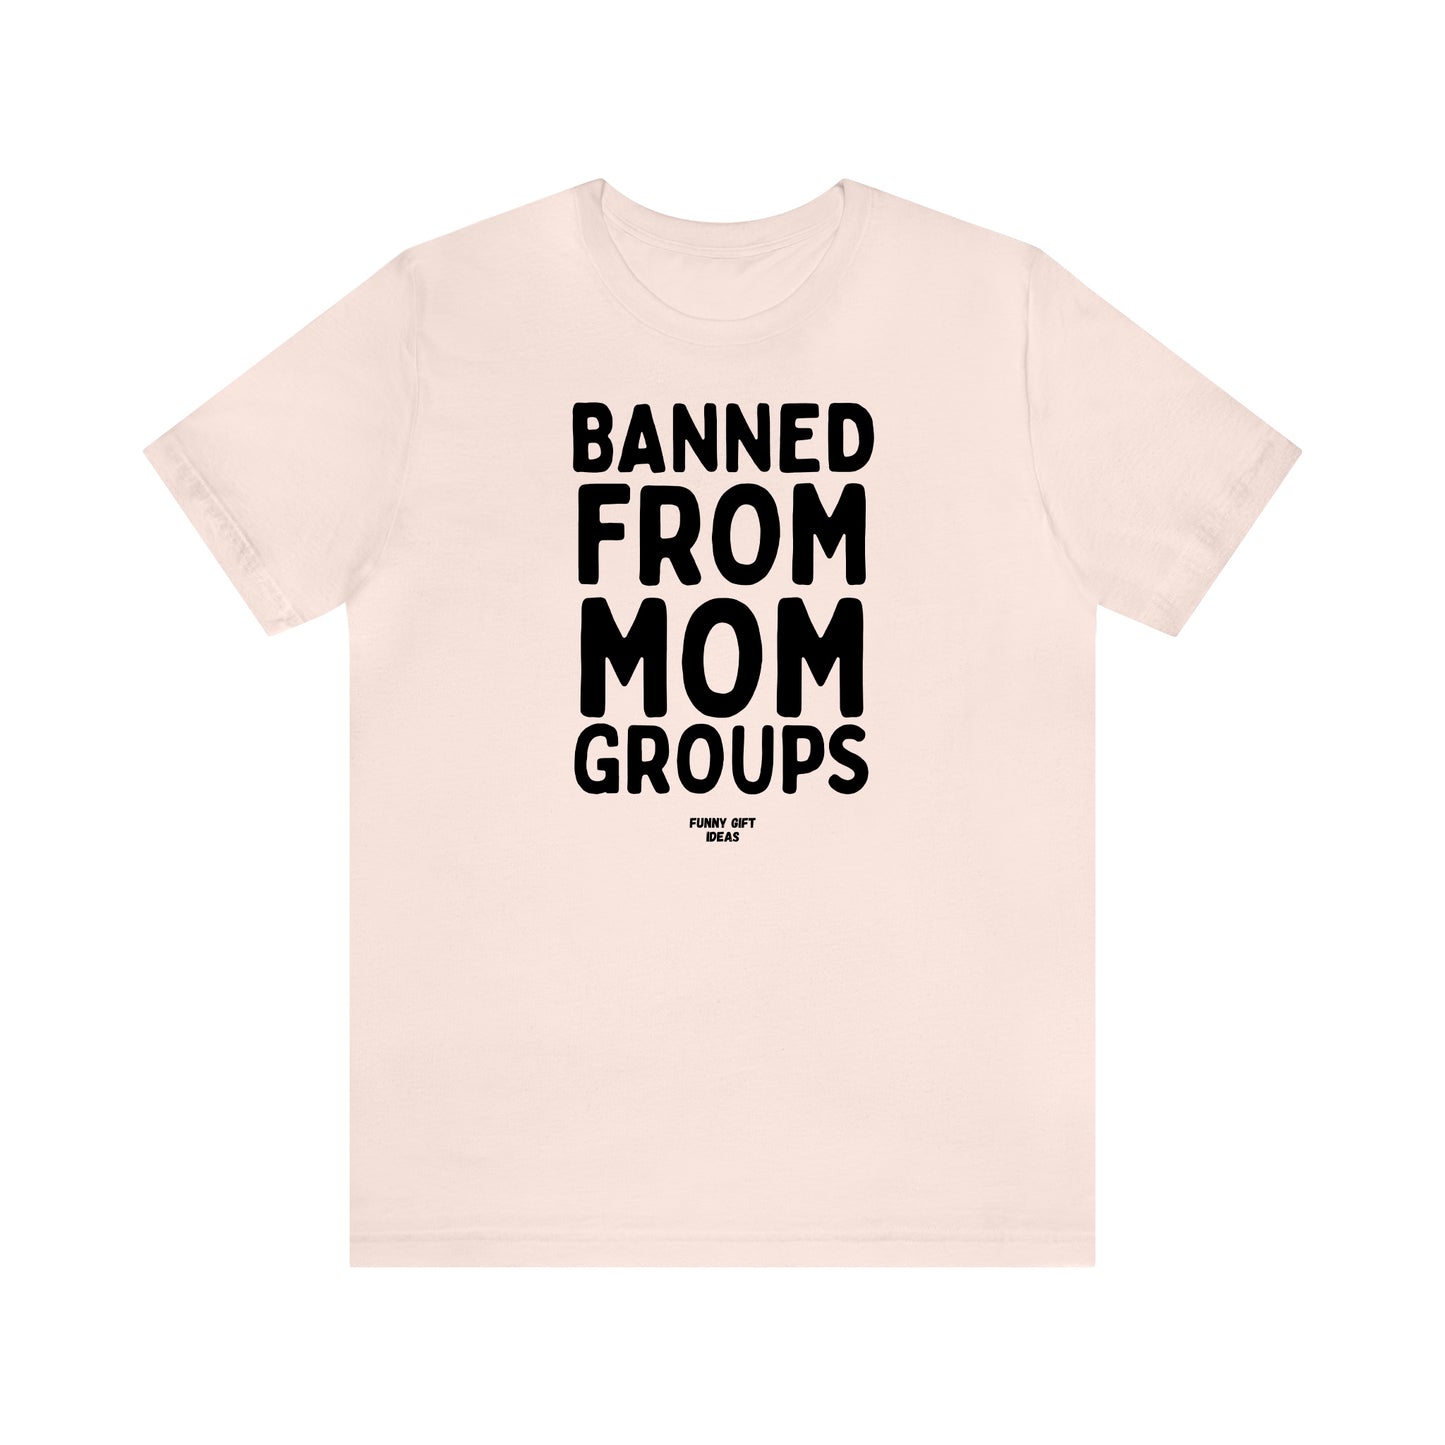 Funny Shirts for Women - Banned From Mom Groups - Women's T Shirts